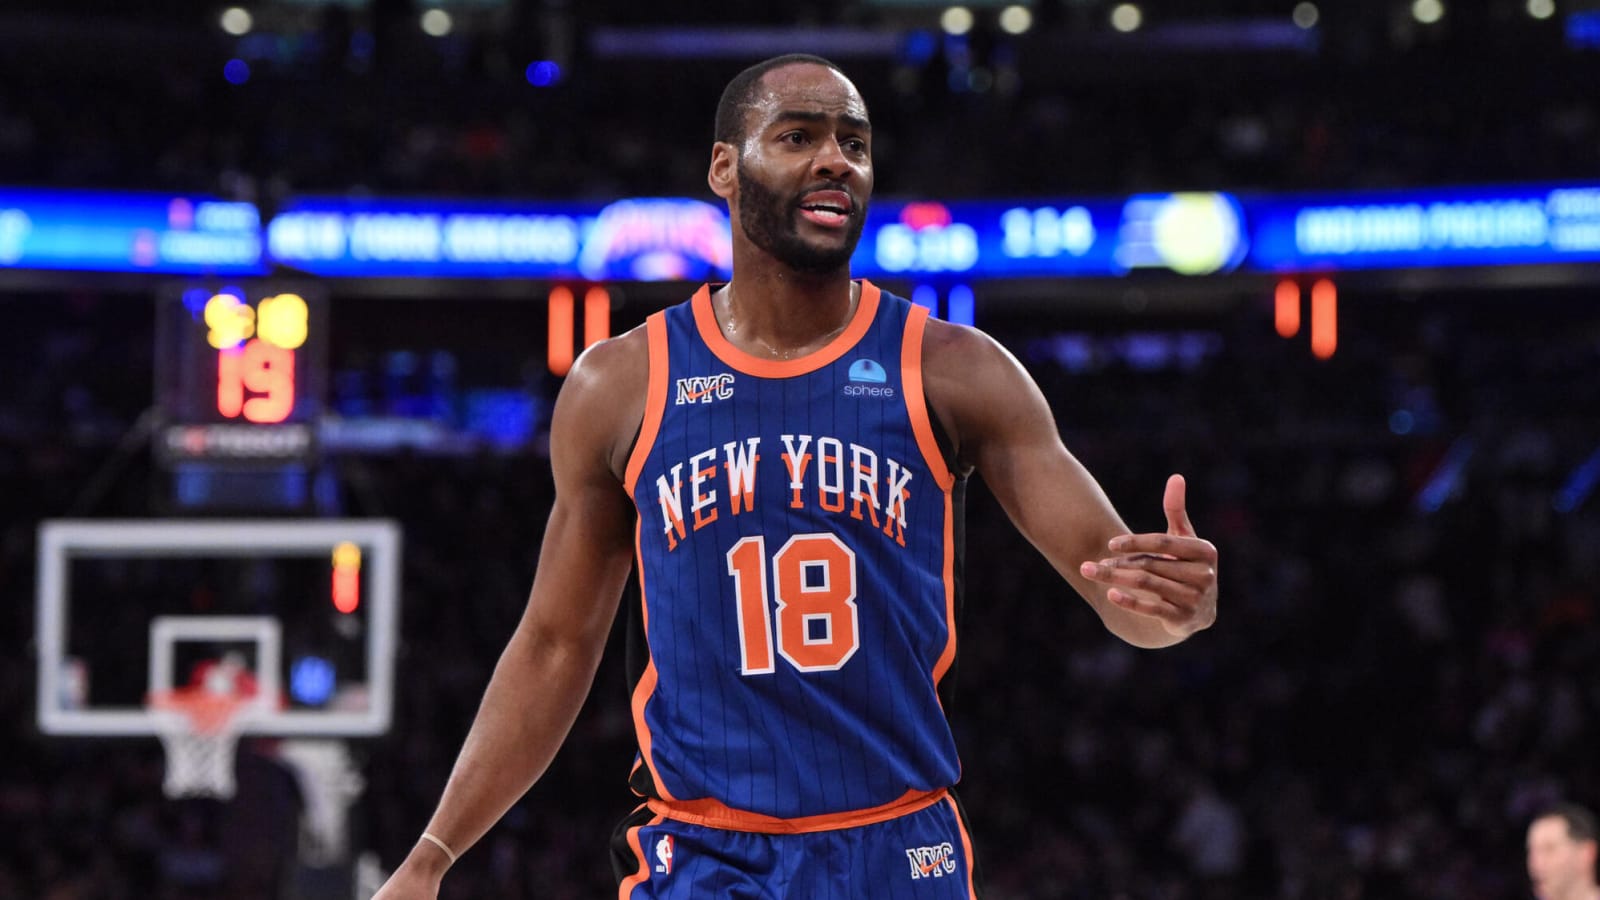 Alec Burks has stepped up for the Knicks when they need him the most